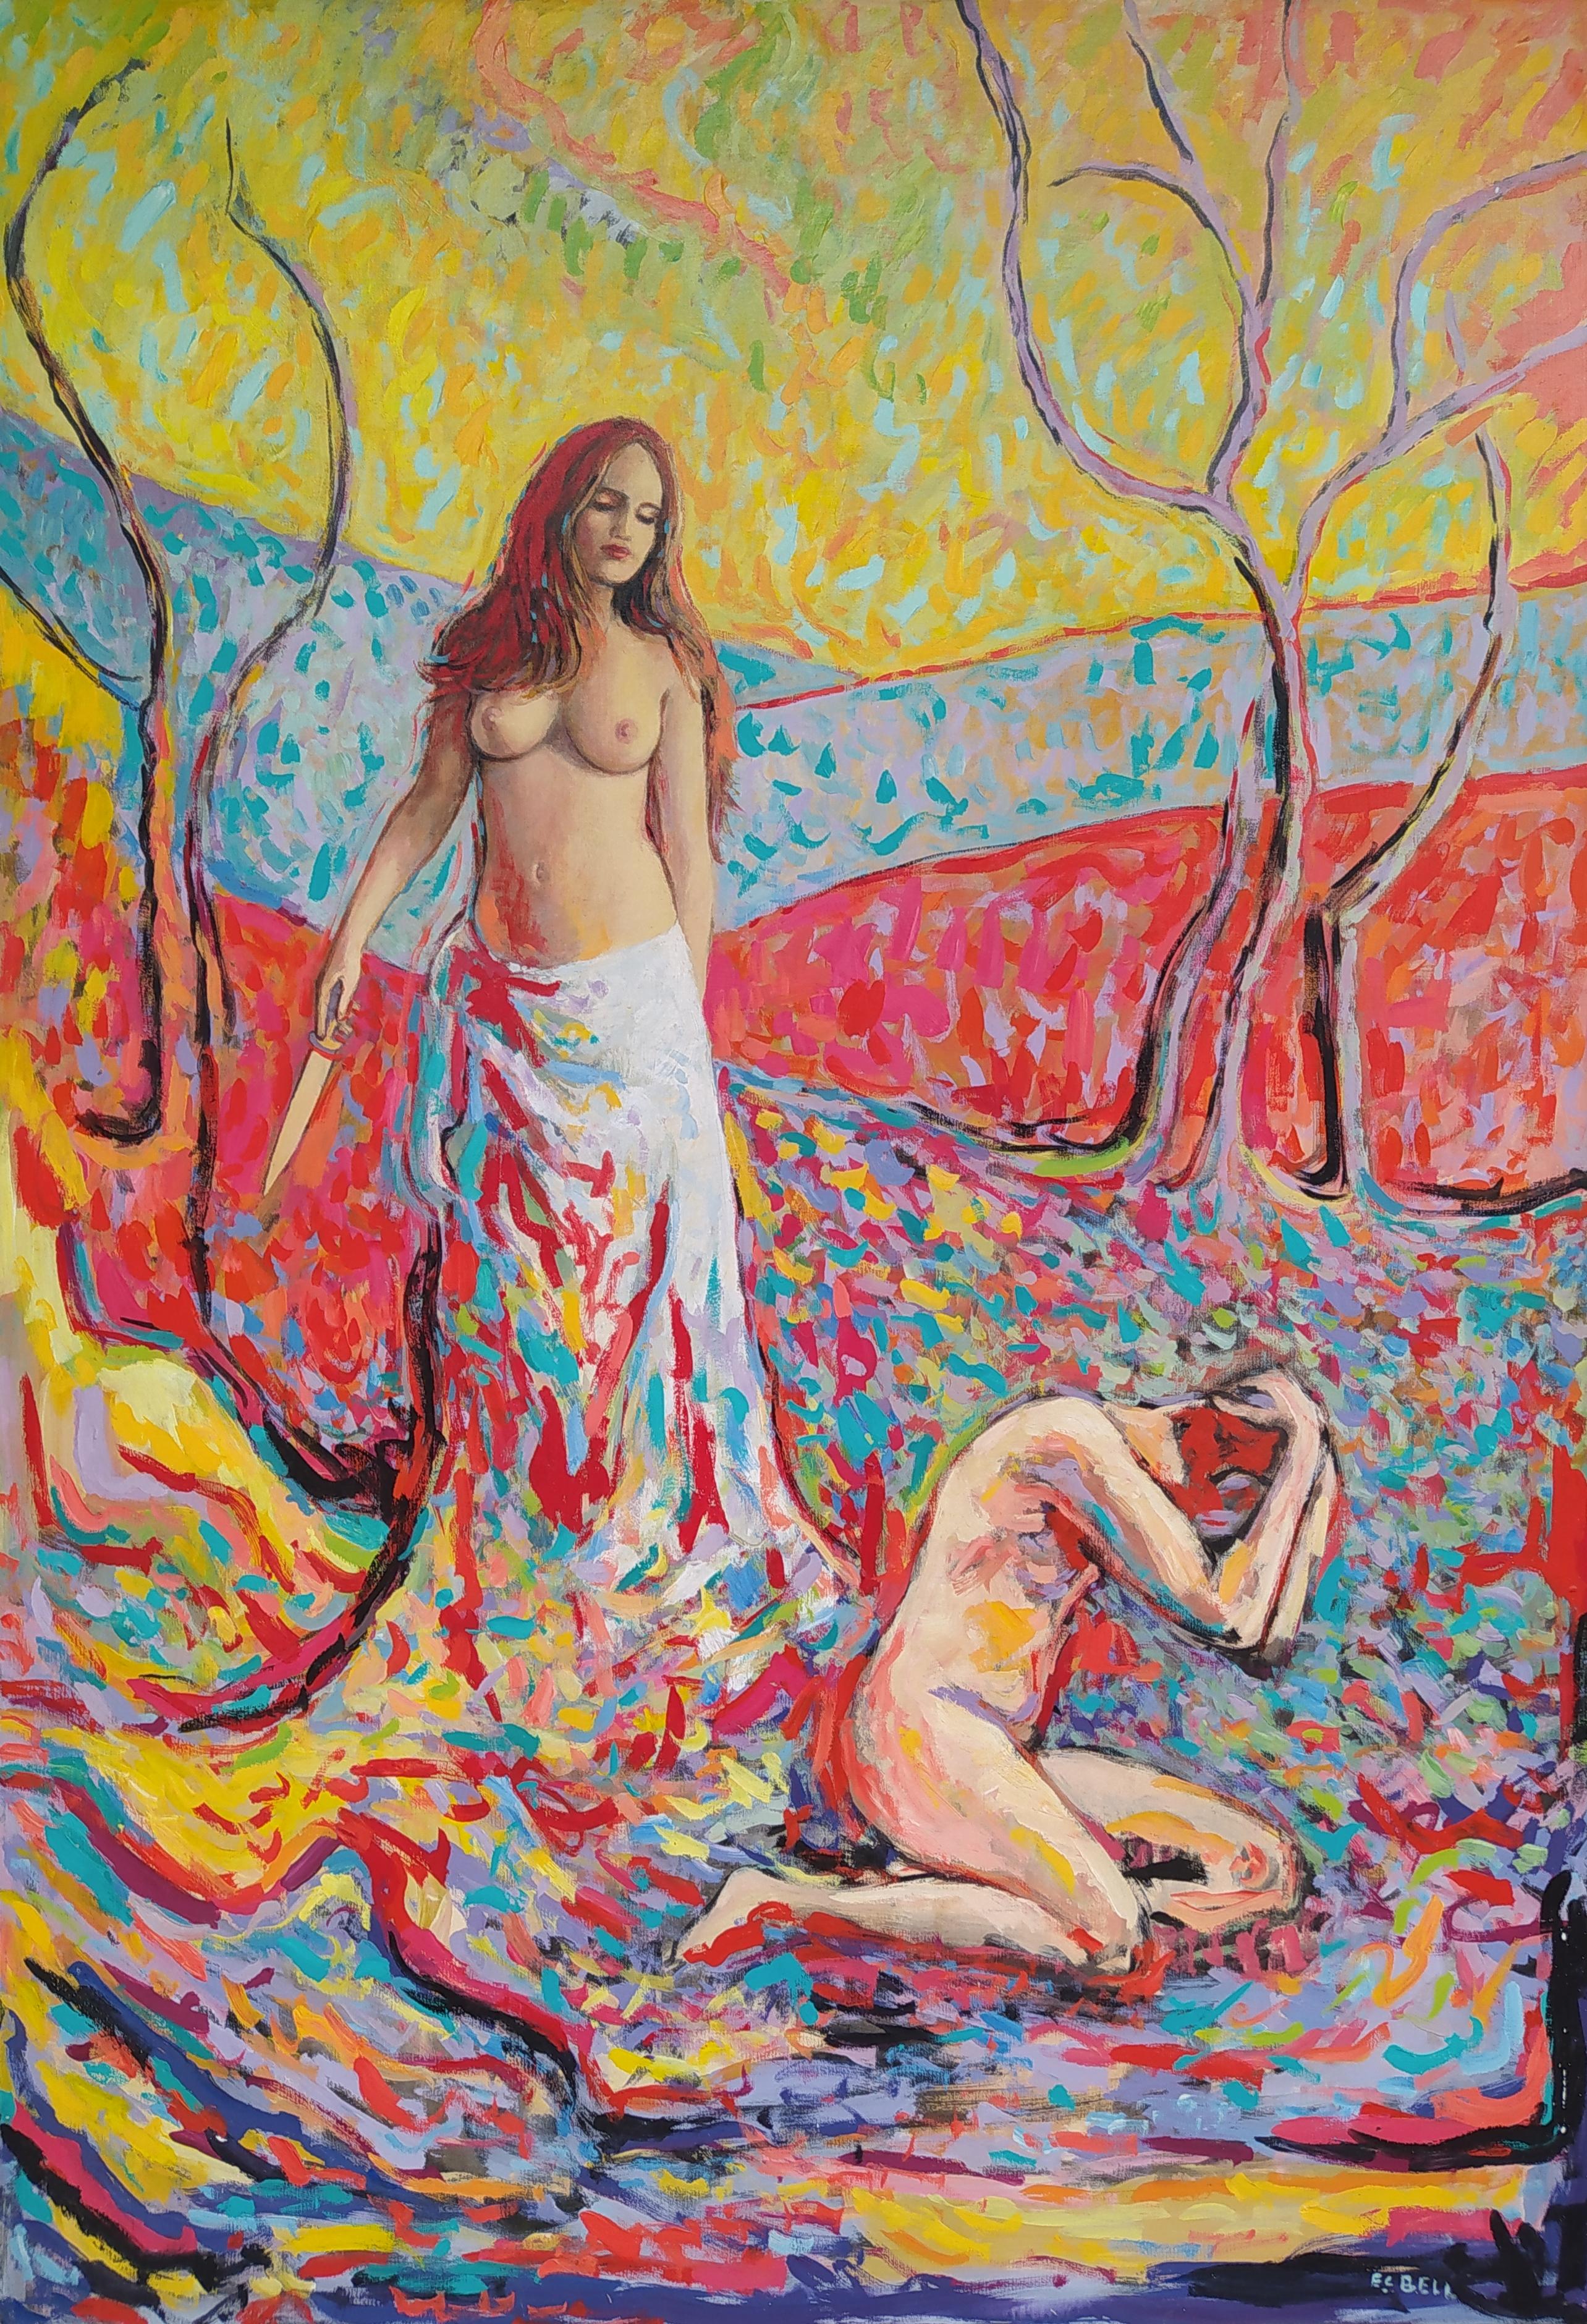 E.C. Bell Nude Painting - "Never More" - Vertical expressionist landscape with nudes in warm colors.